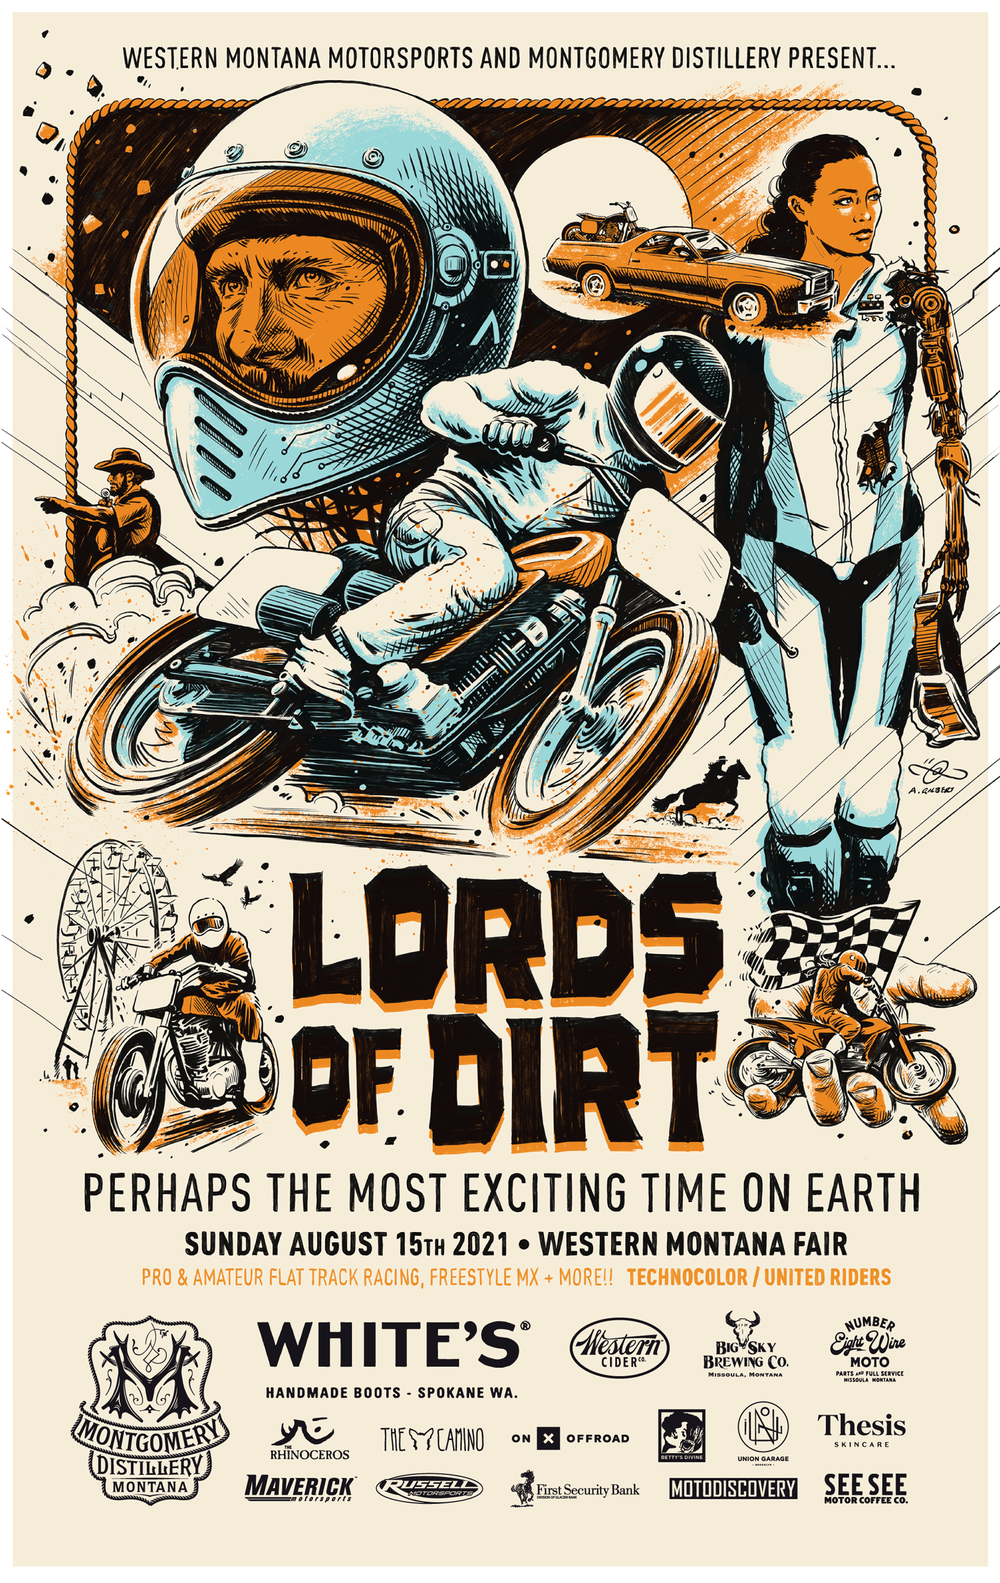 Lords of Dirt Flat Track Motorcycle Racing & Freestyle Moto-X at the Western Montana Fair in Missoula, Montana